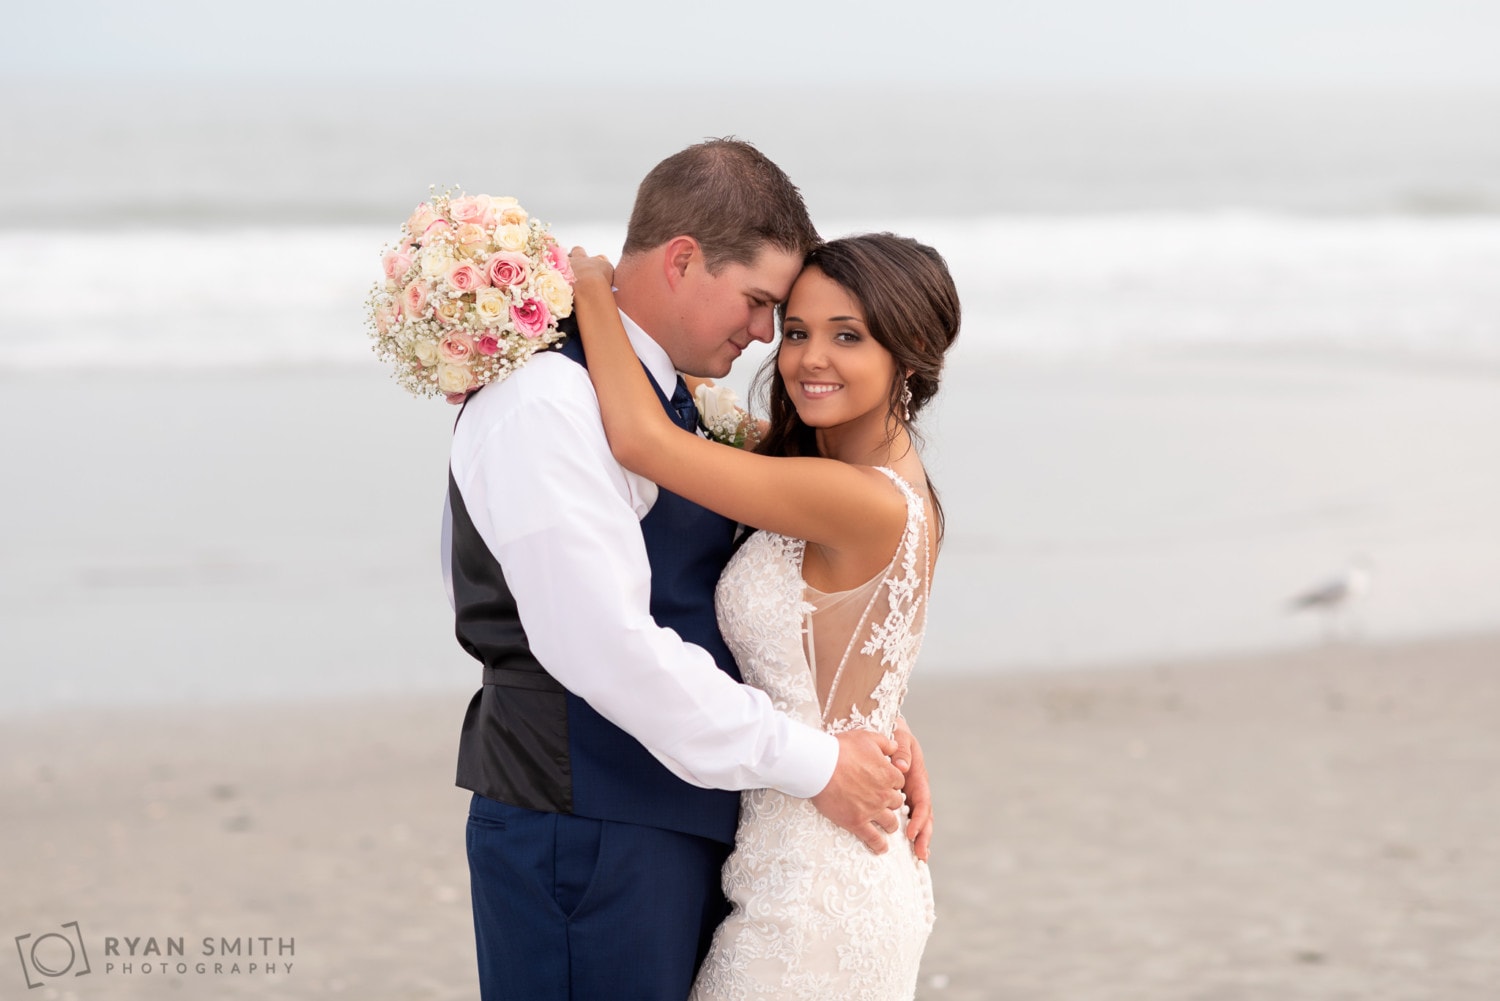 Happy couple in front of the ocean showing off the bouquet of roses - Avista Resort - North Myrtle Beach